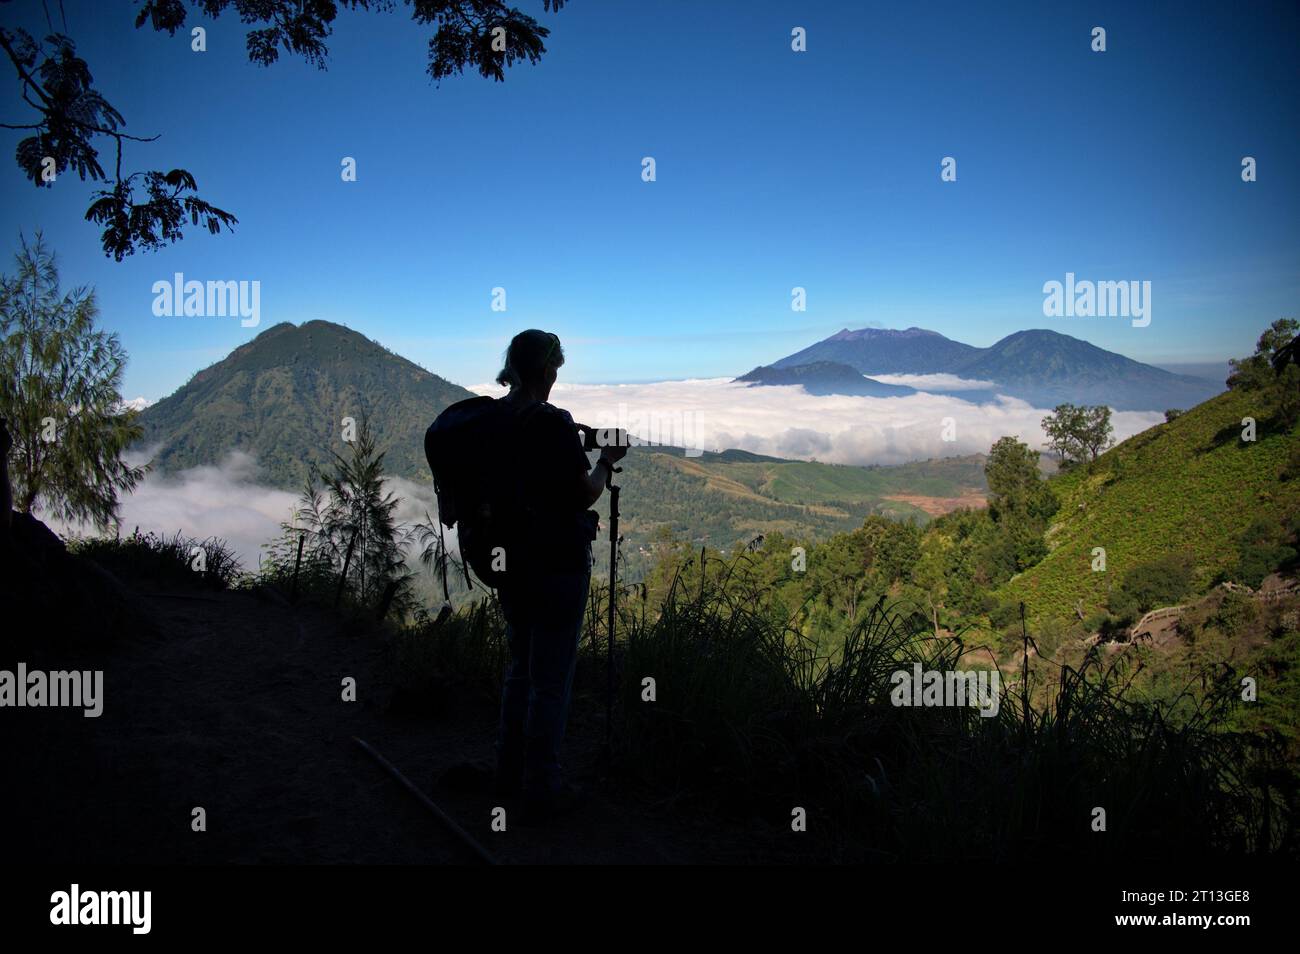 Rear view of woman taking photo on the way to Ijen volcano, Indonesia Stock Photo